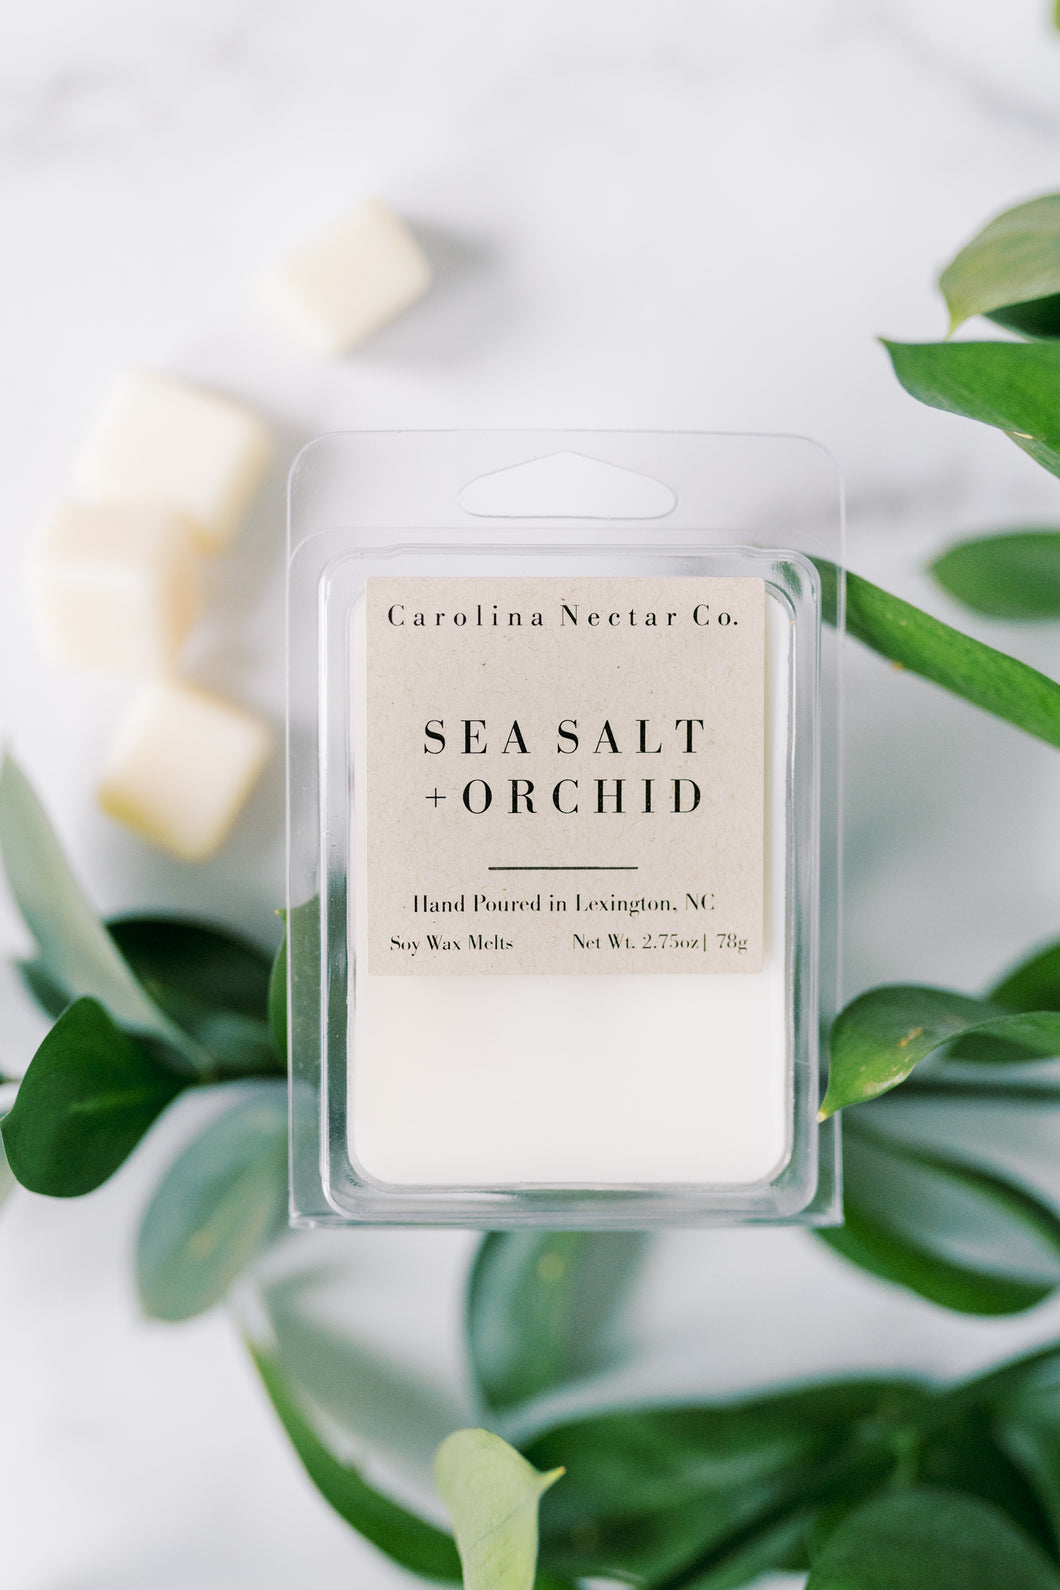 Sea salt and orchid soy wax melts hand poured in NC